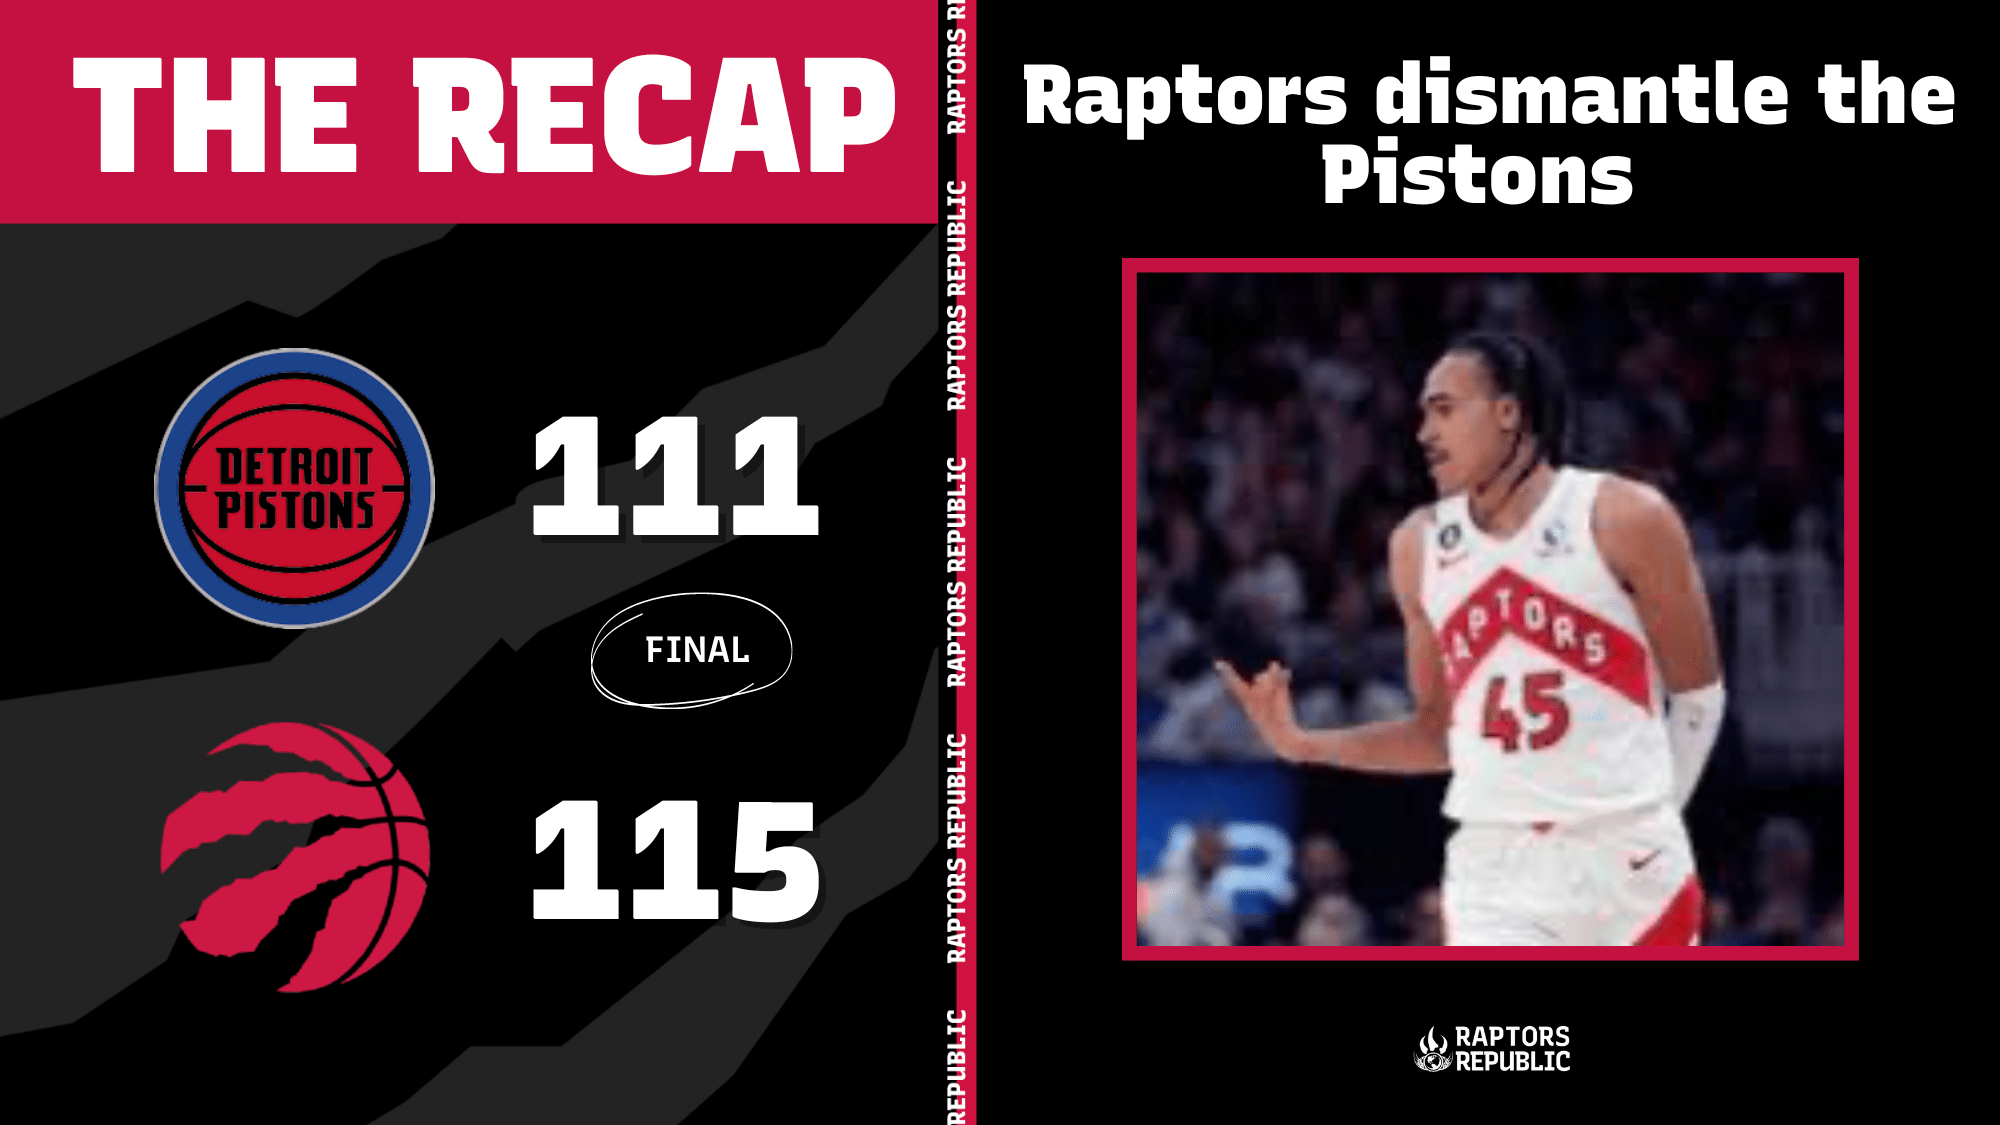 The Raptors dismantled the Pistons